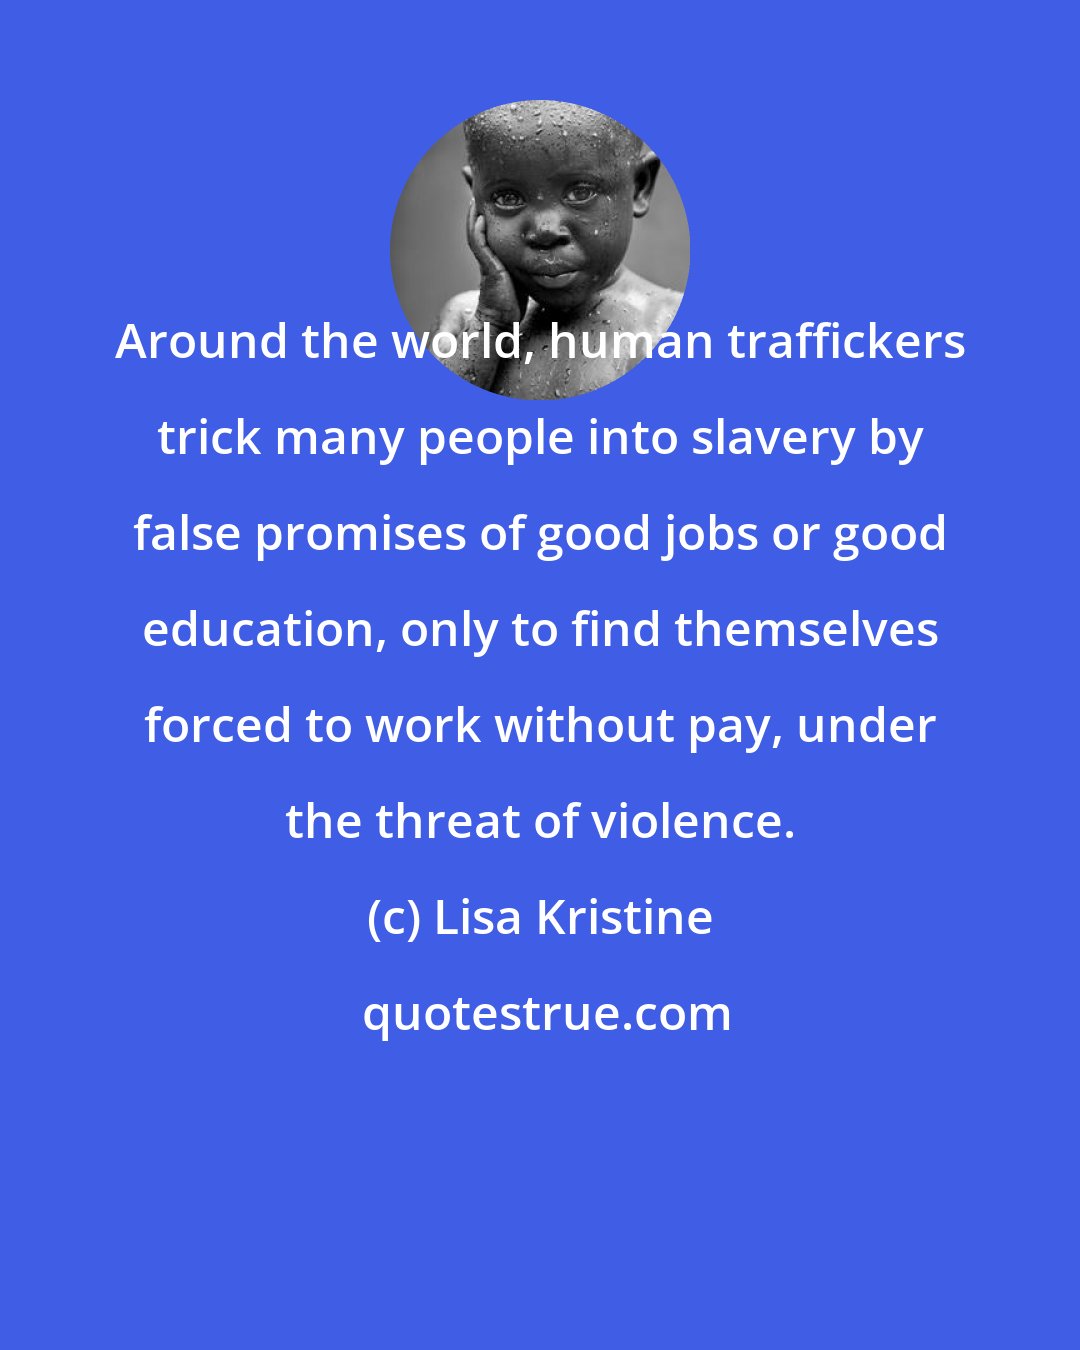 Lisa Kristine: Around the world, human traffickers trick many people into slavery by false promises of good jobs or good education, only to find themselves forced to work without pay, under the threat of violence.